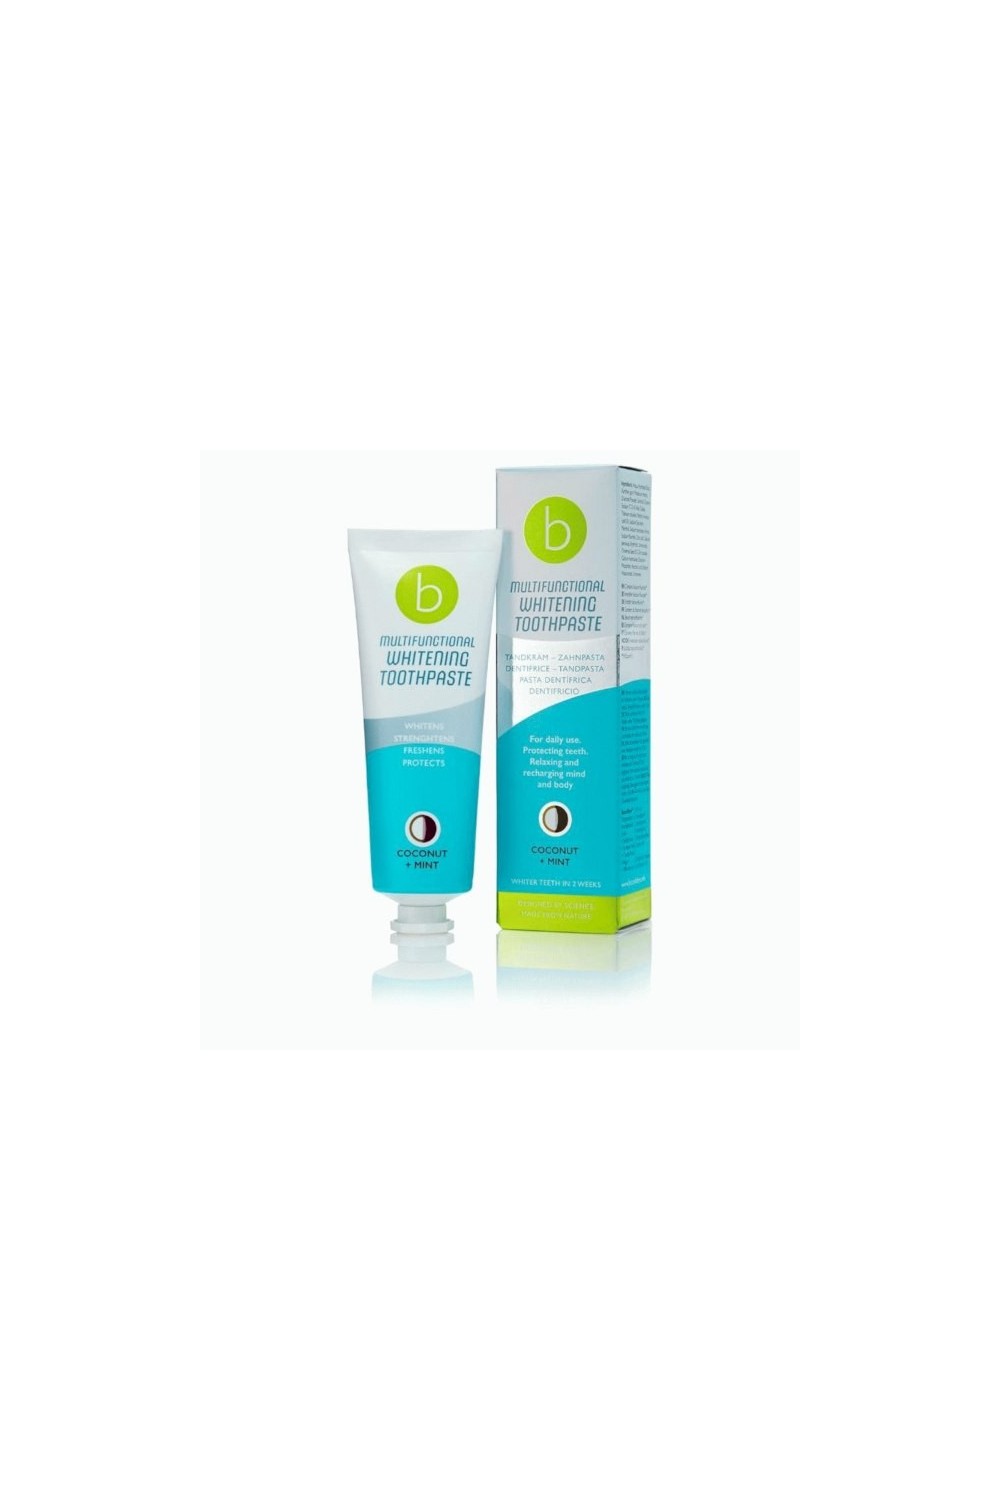 Beconfident Multifunctional Coconut + Mint Whitening Toothpaste 75ml